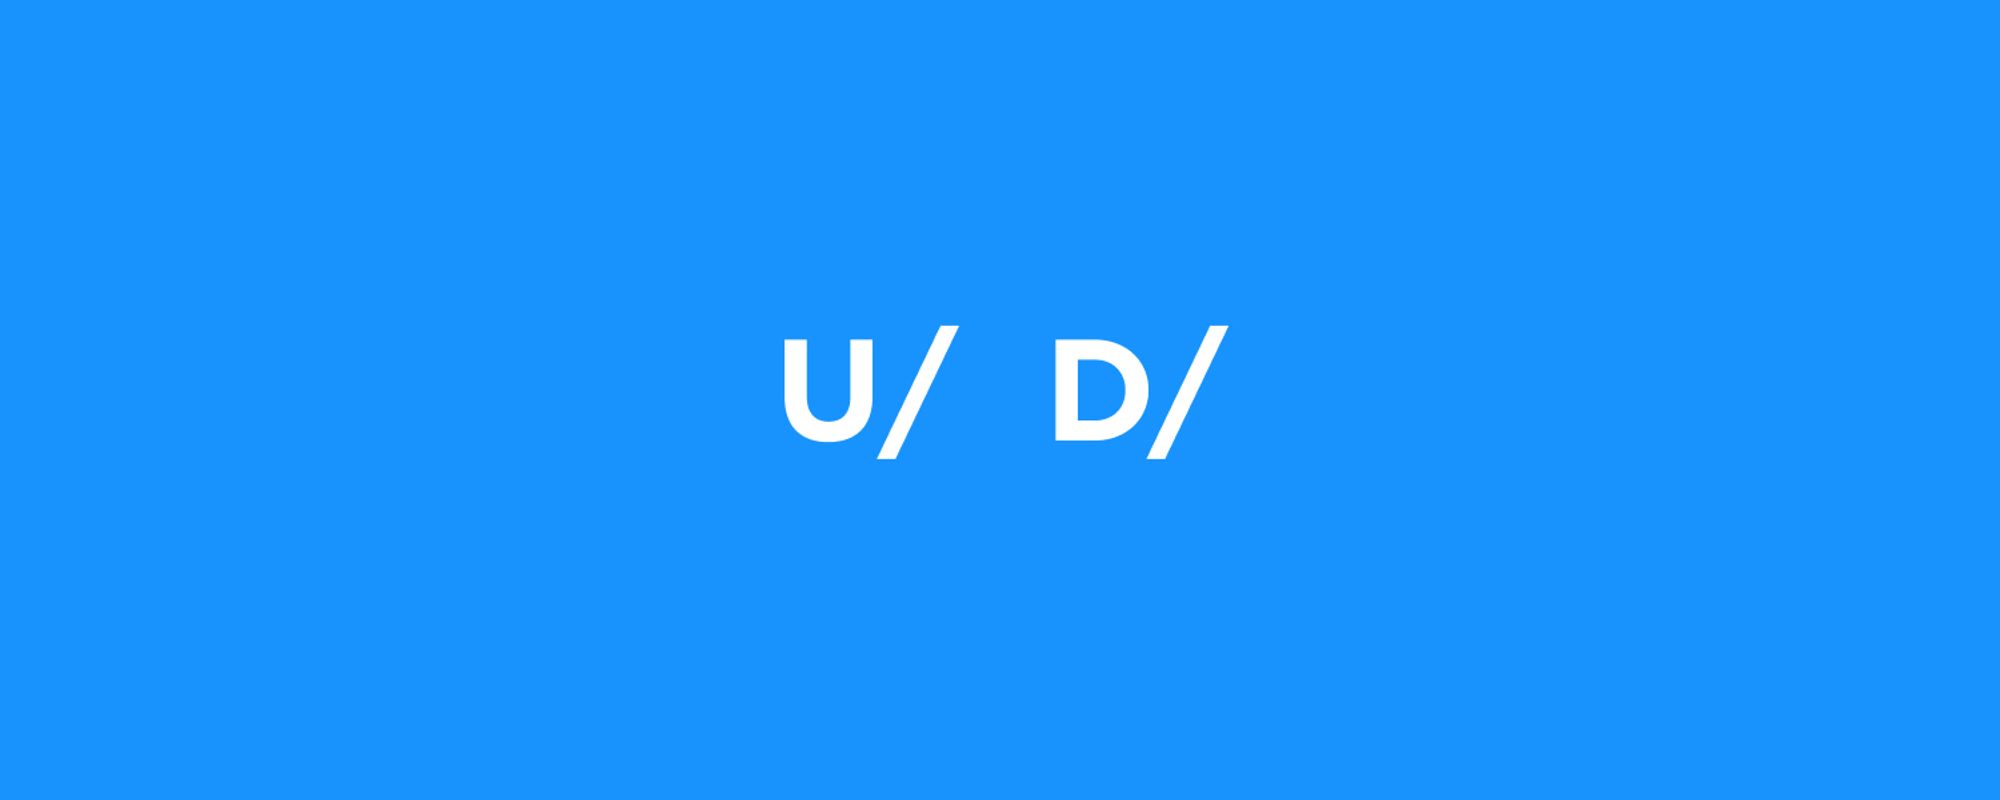 What are the "U/" and "D/" represents?